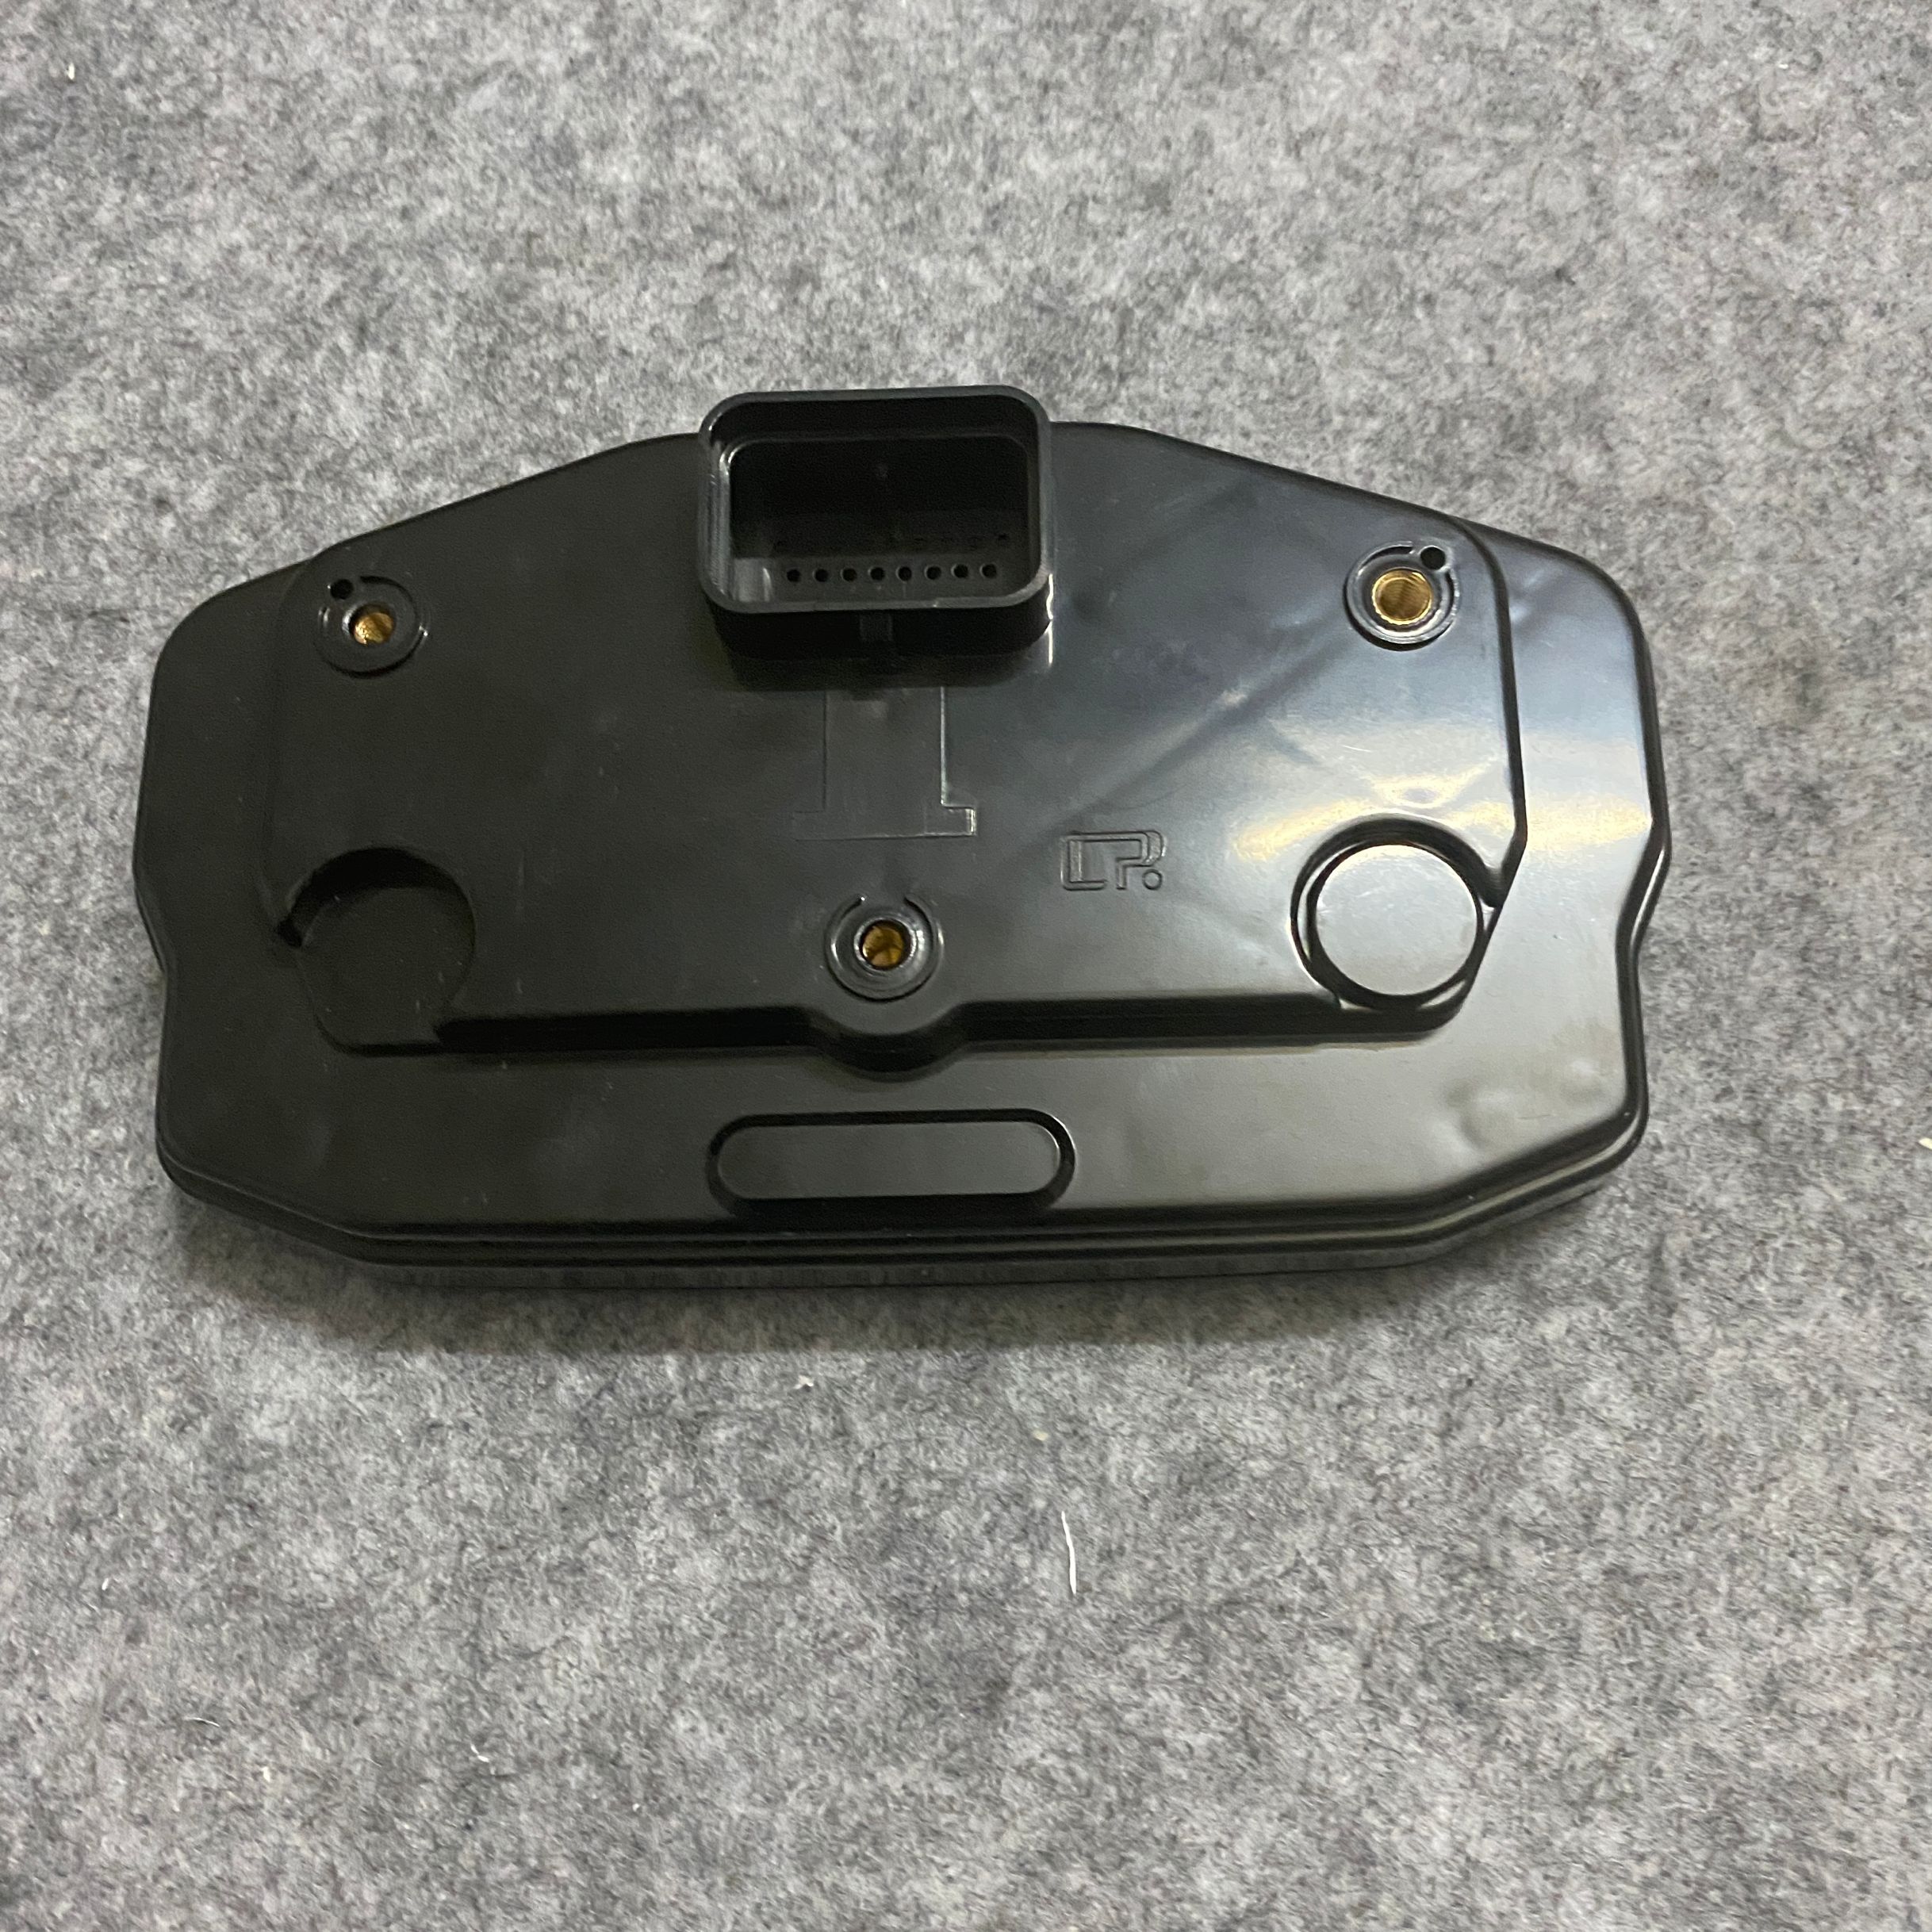 For Ducati 848 959 899 1299 1198 1199 Panigale Sportbike Speedometer Case Odometer Gauge Instrument Cover Tachometer Housing Box